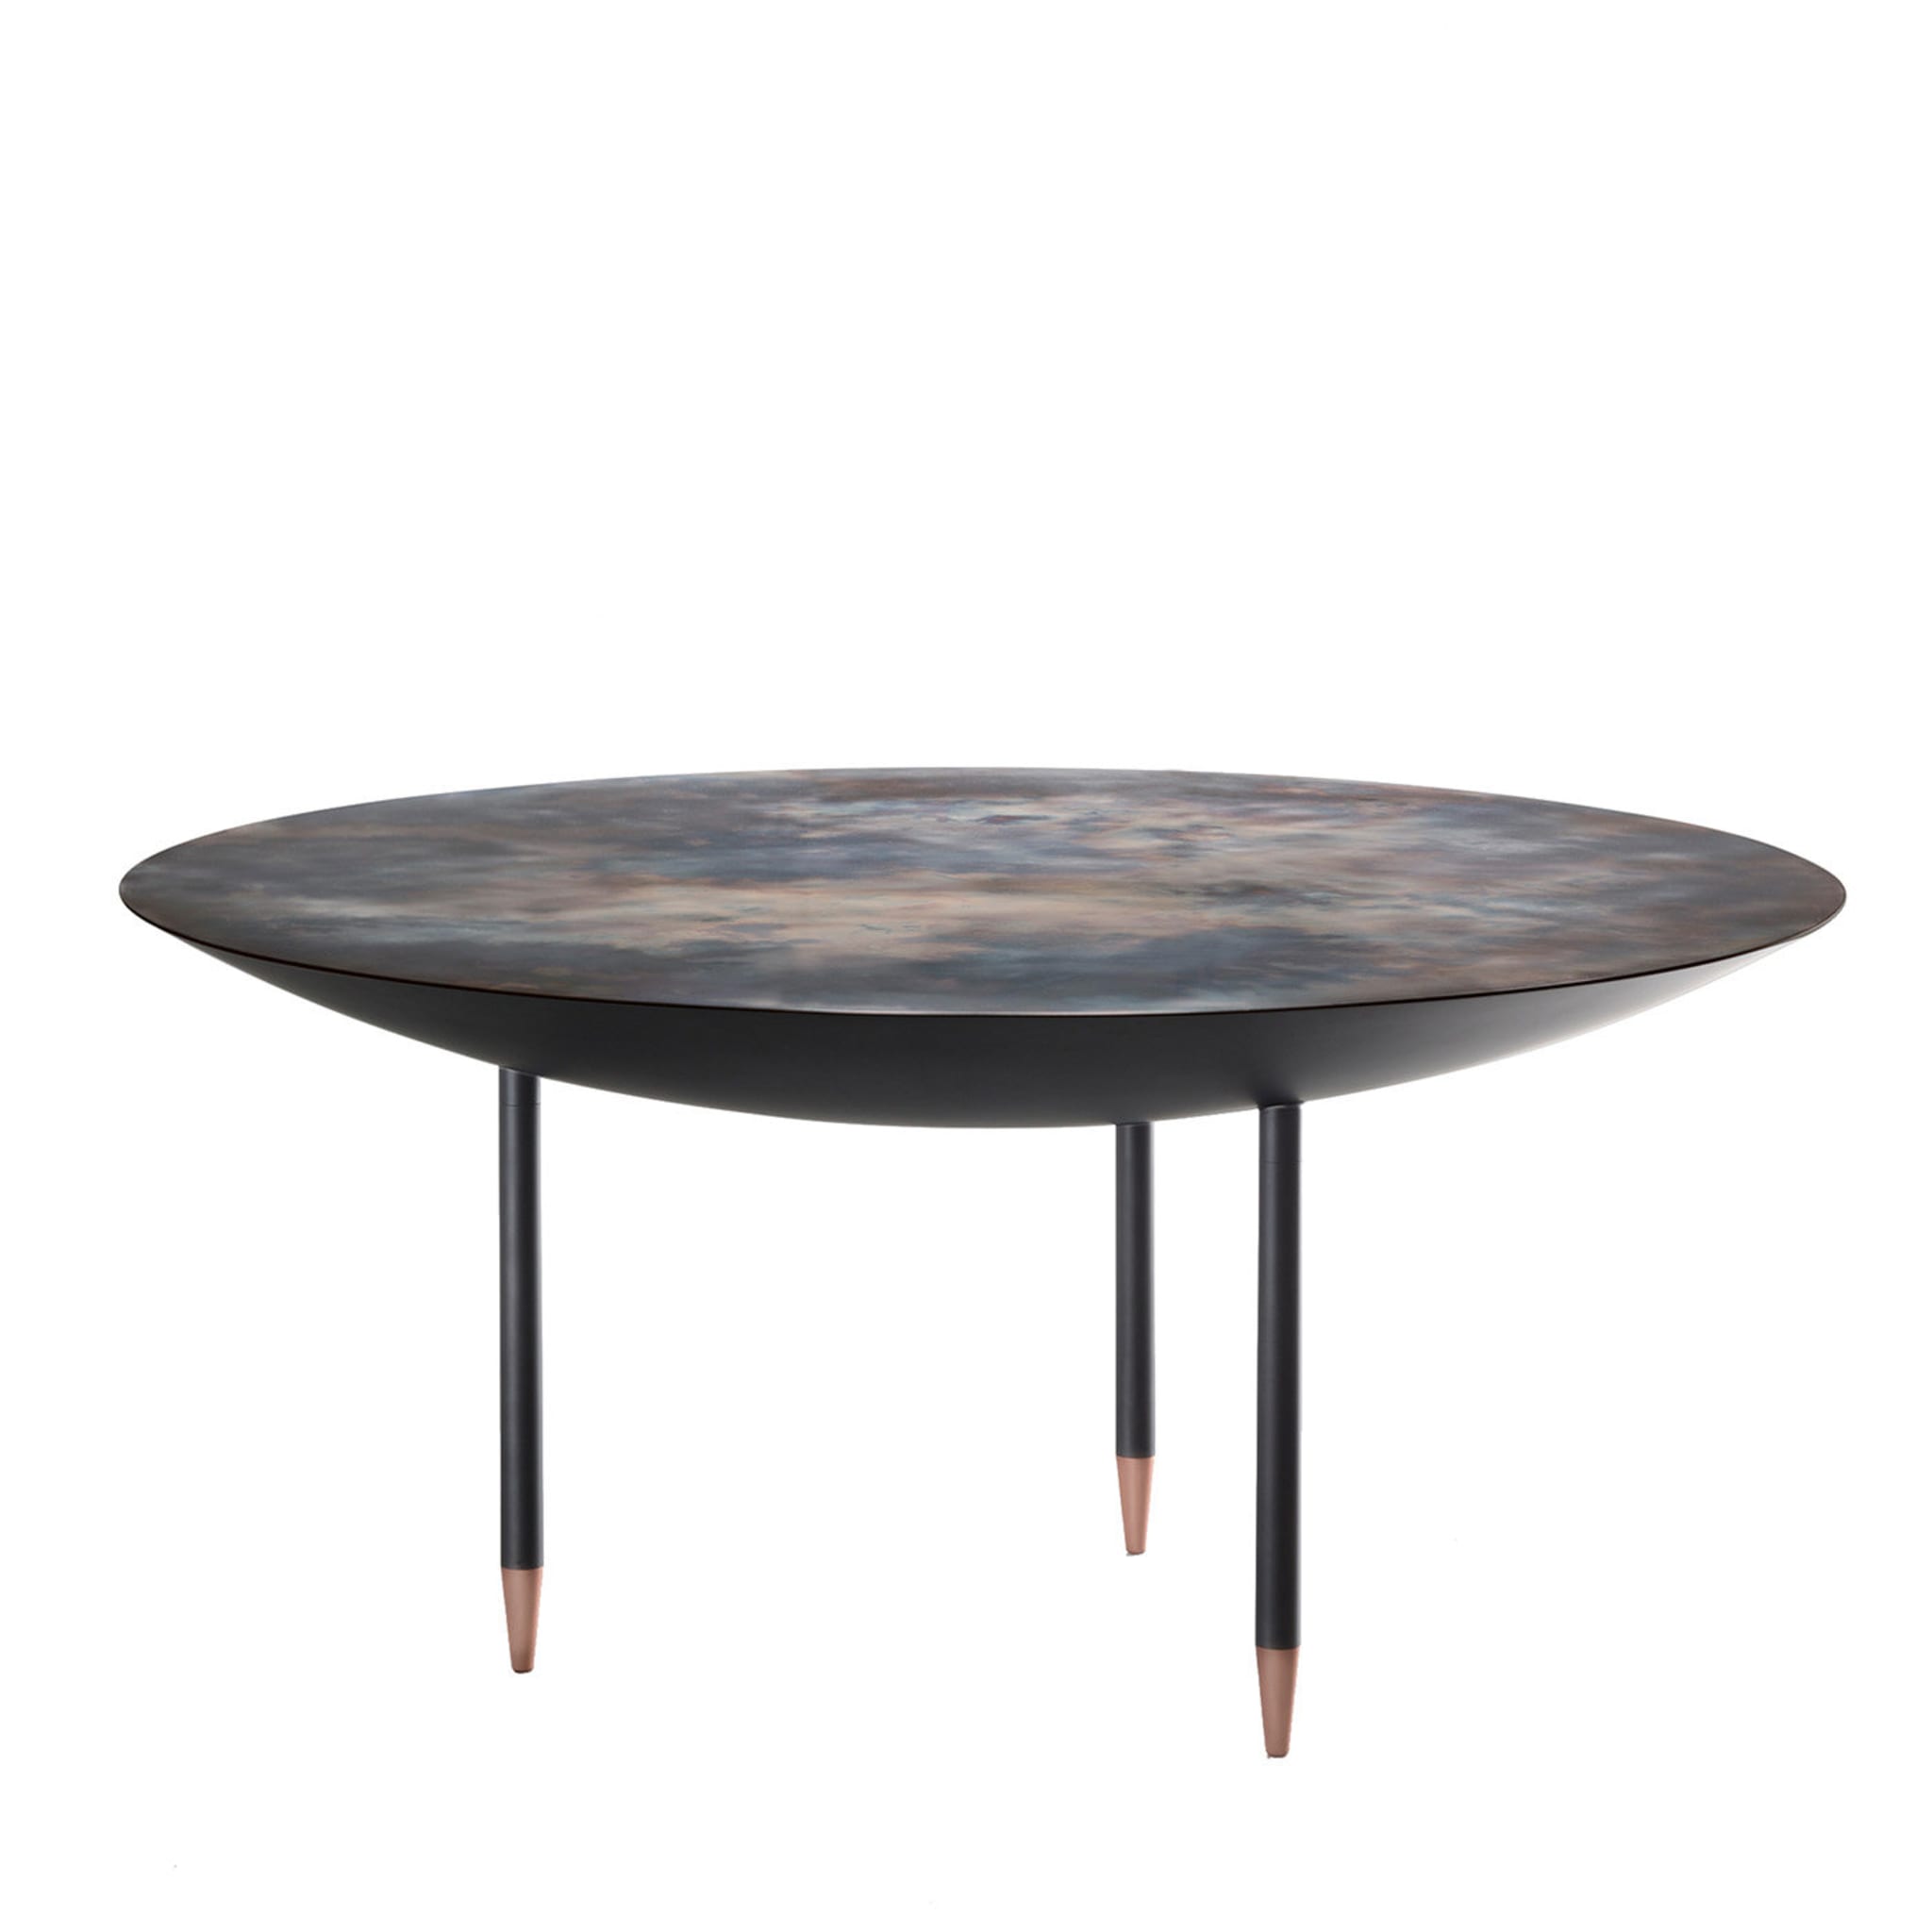 Roma Table by Giovanni Minelli and Marco Fossati - Main view